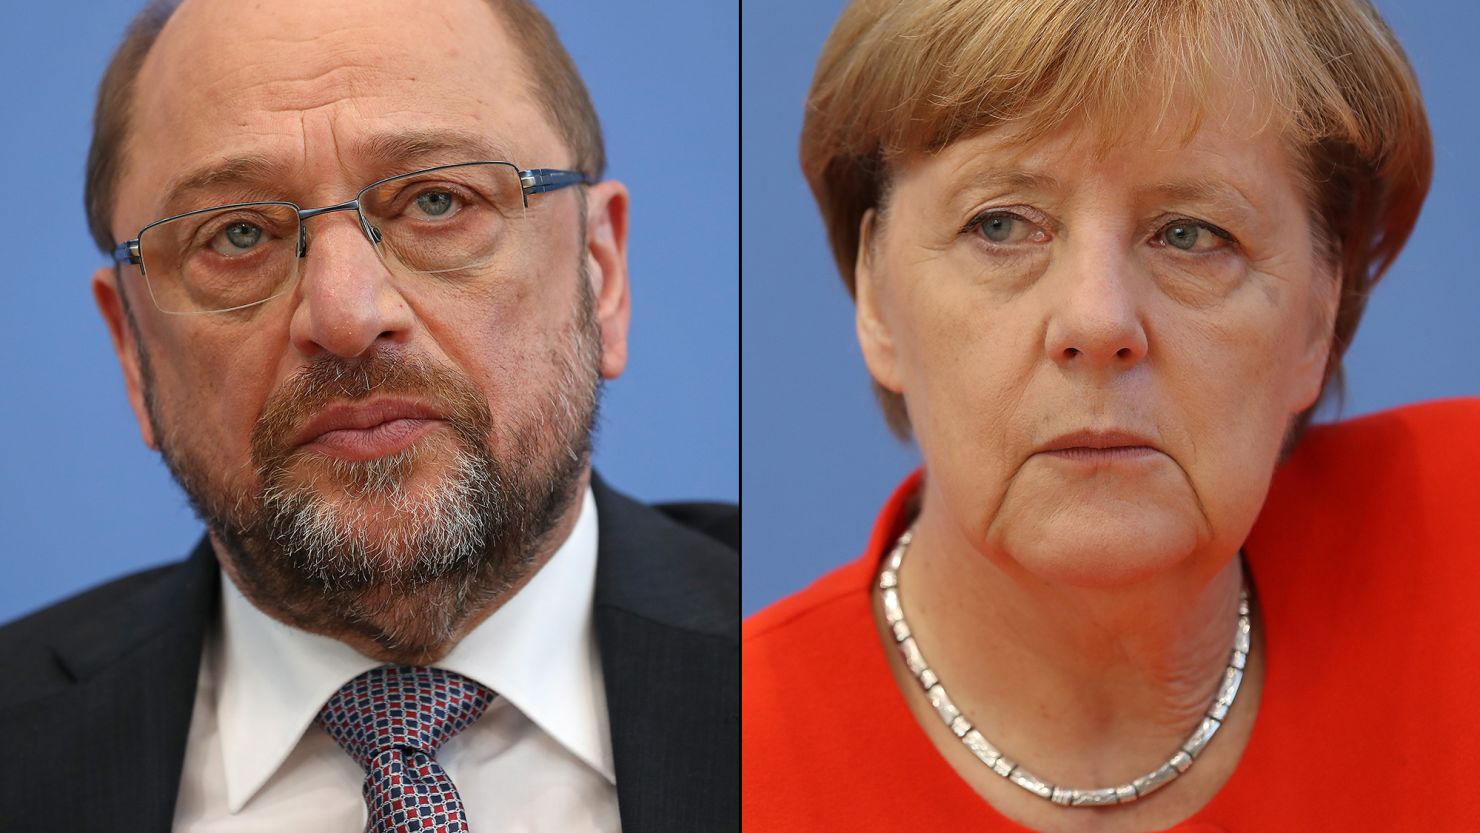 Martin Schulz of the Social Democratic Party will be trying to set a distinct agenda from the Christian Democratic Union's Angela Merkel. 